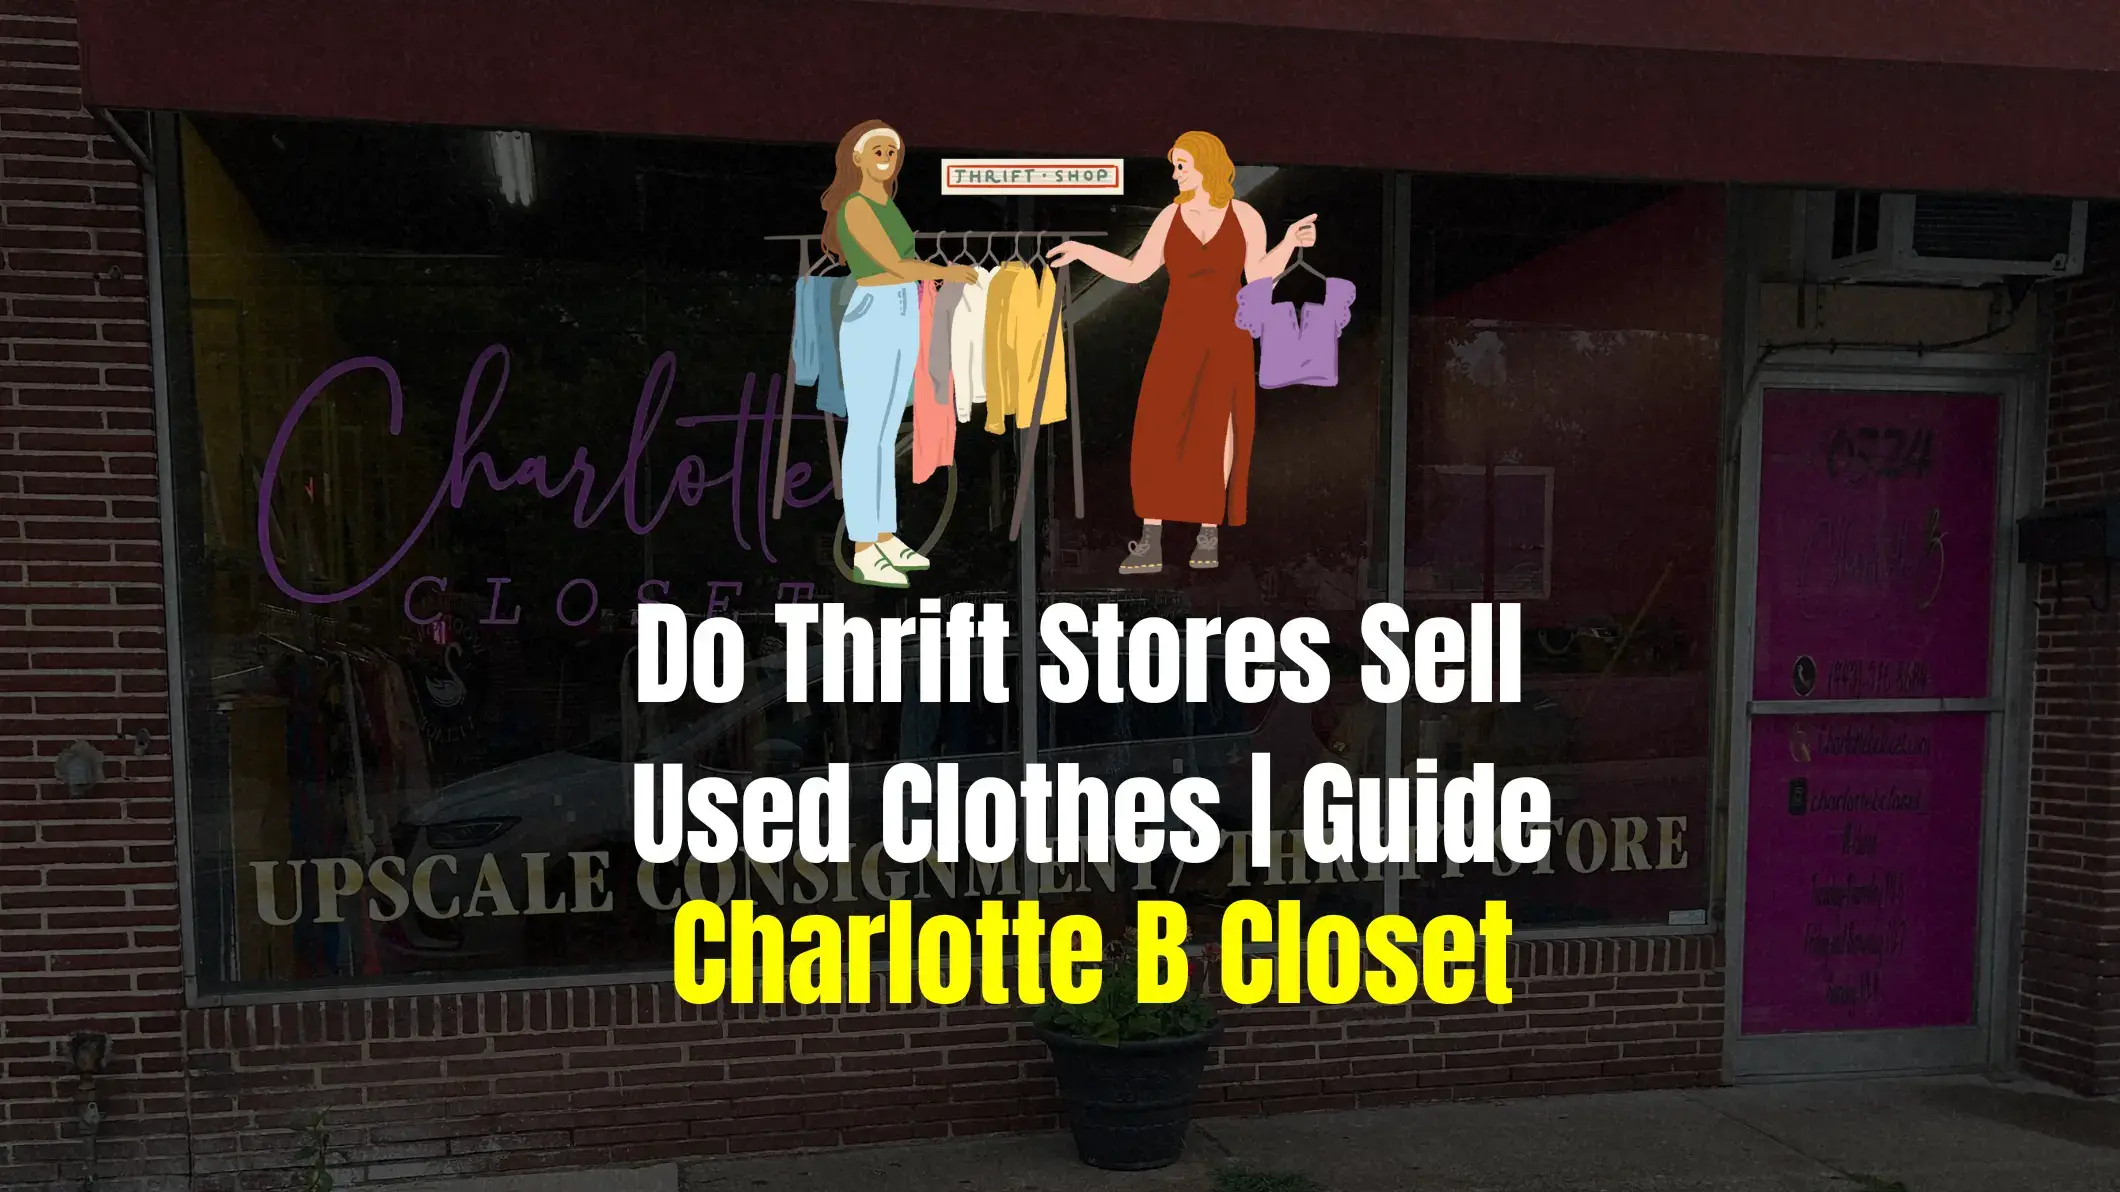 Do Thrift Stores Sell Used Clothes - Detailed Guide